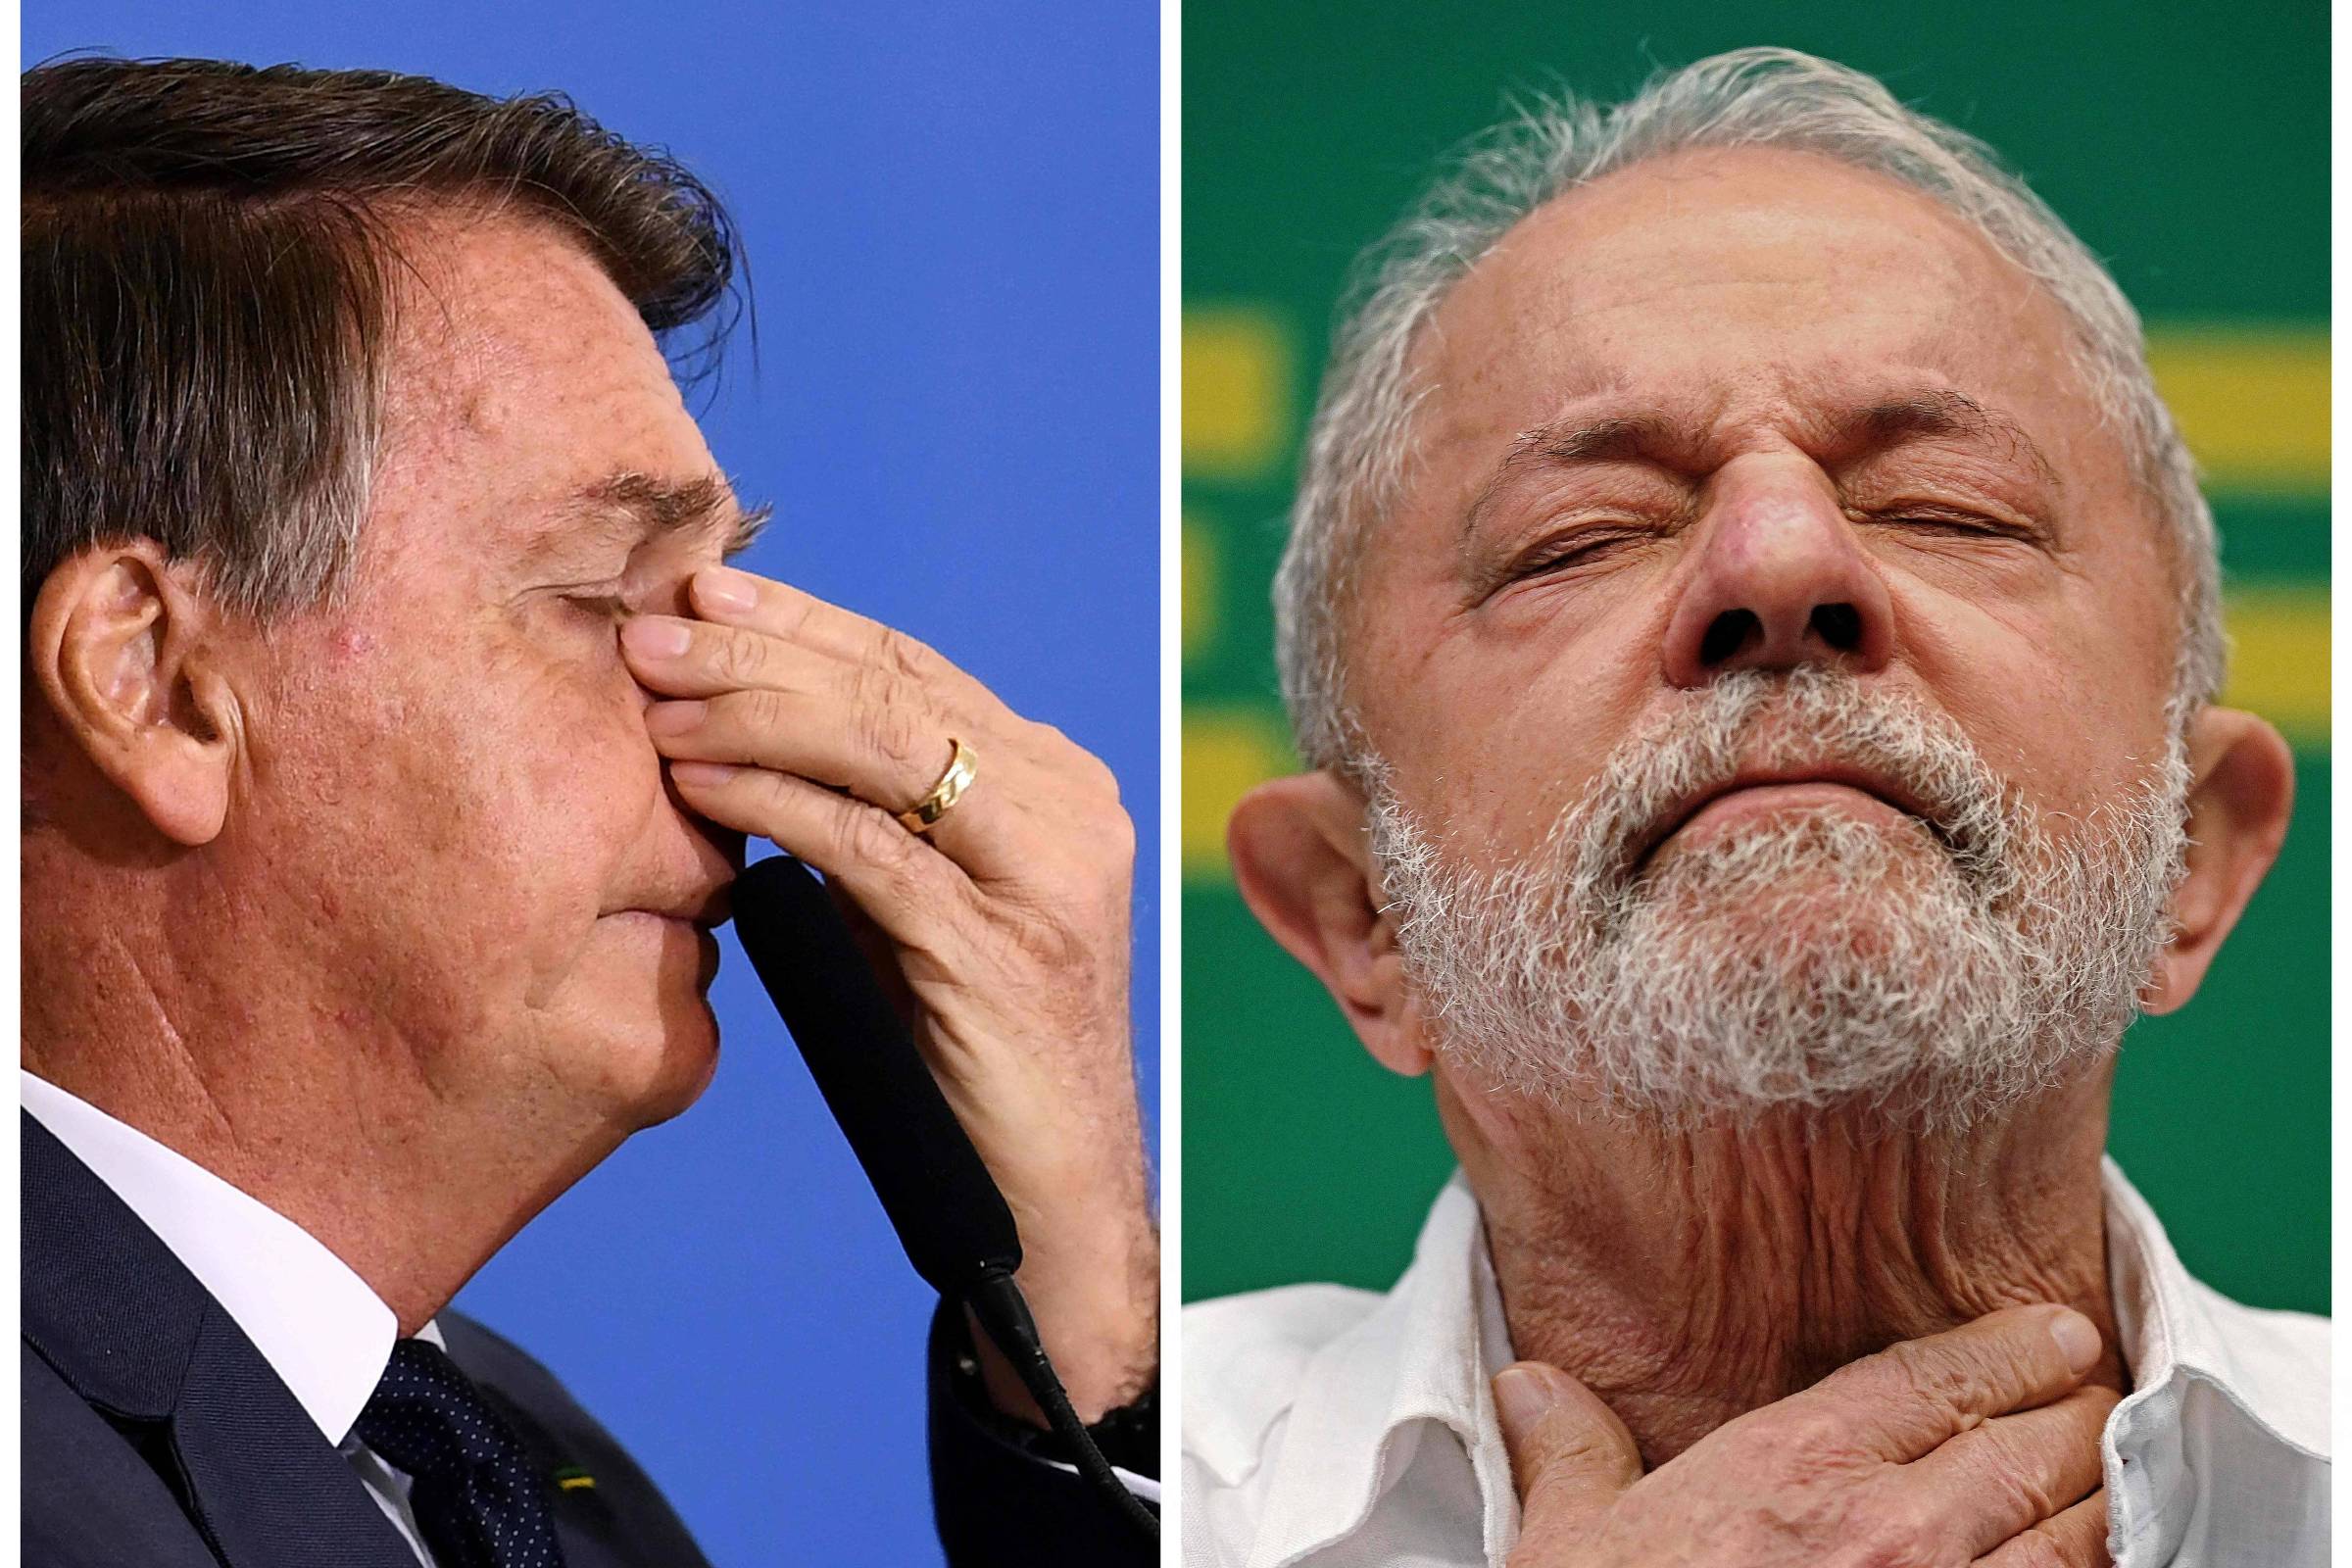 Have the moderate right found itself on the Brazilian political landscape?  YES - 10/14/2022 - Opinion